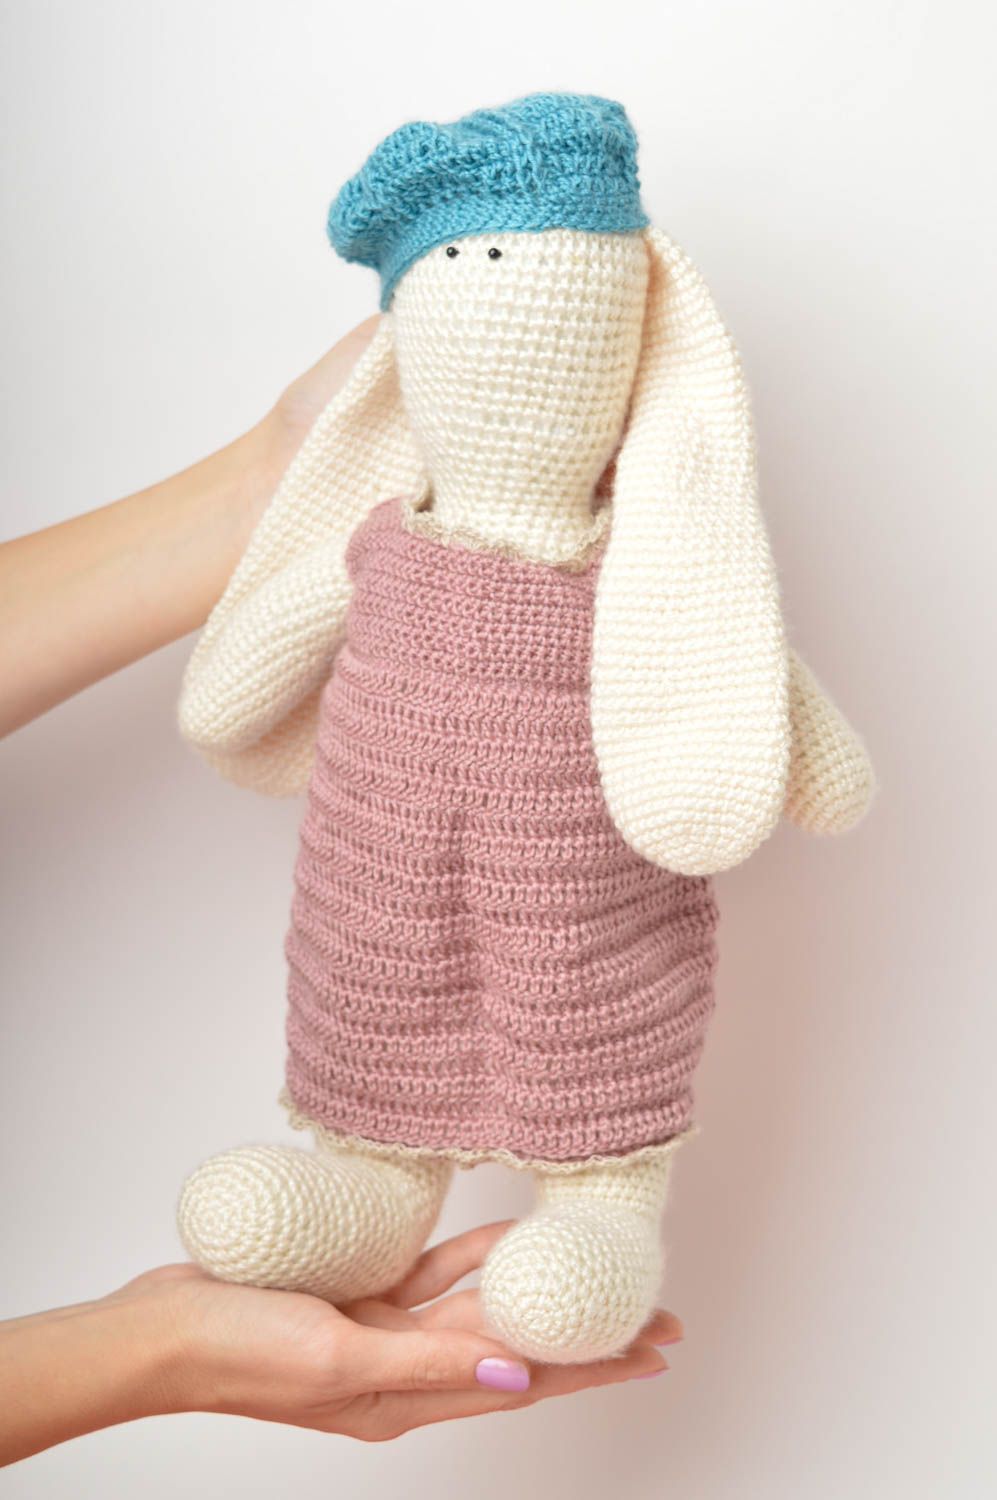 Handmade toy crocheted toy soft toy for kids decorative use only gift ideas photo 4